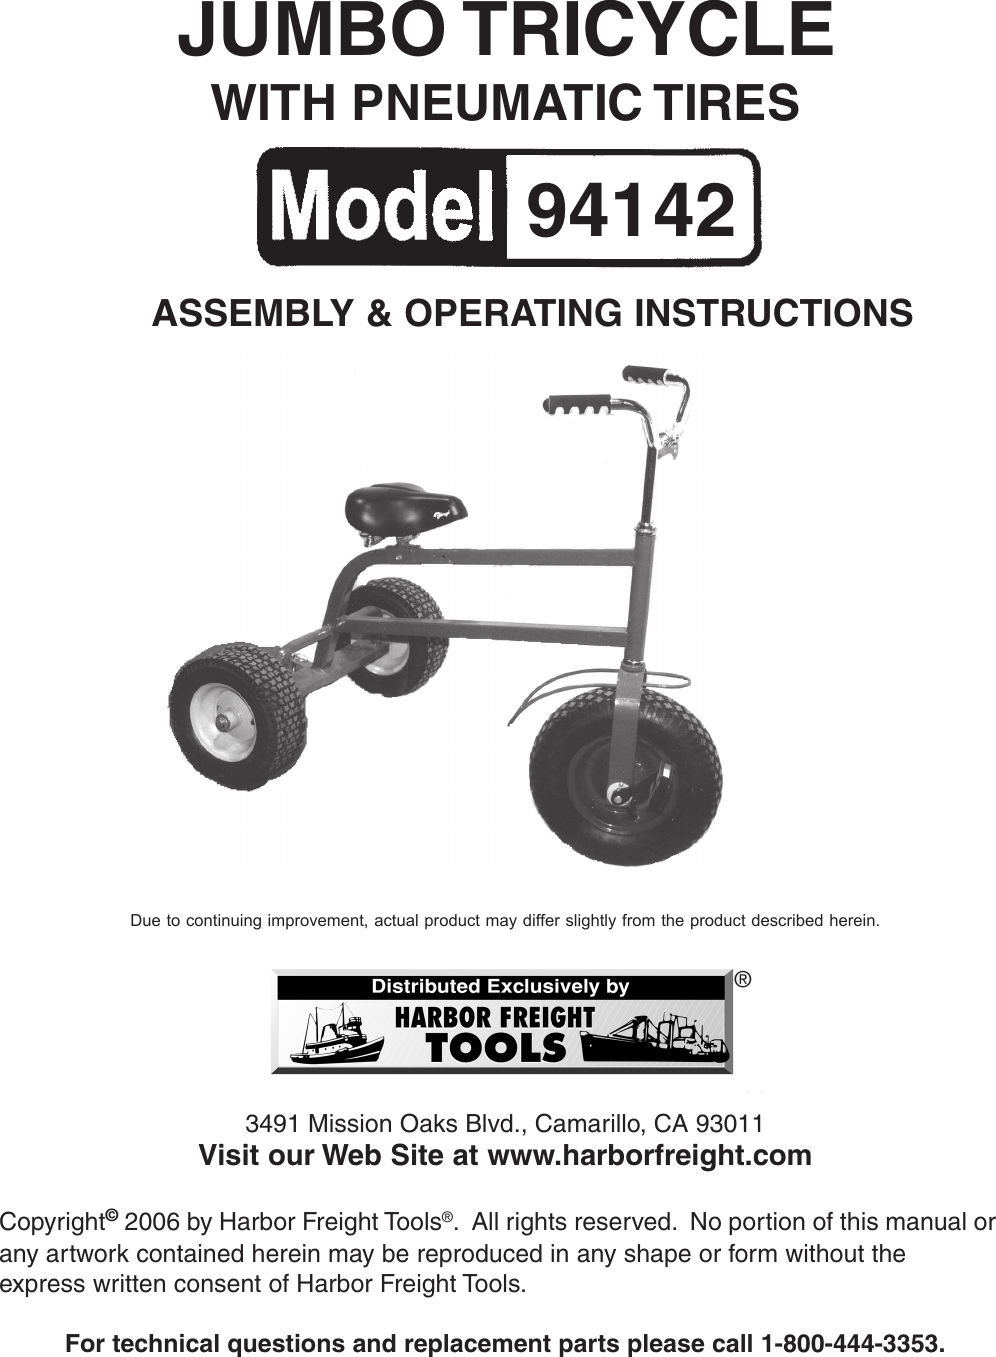 harbor freight tricycle